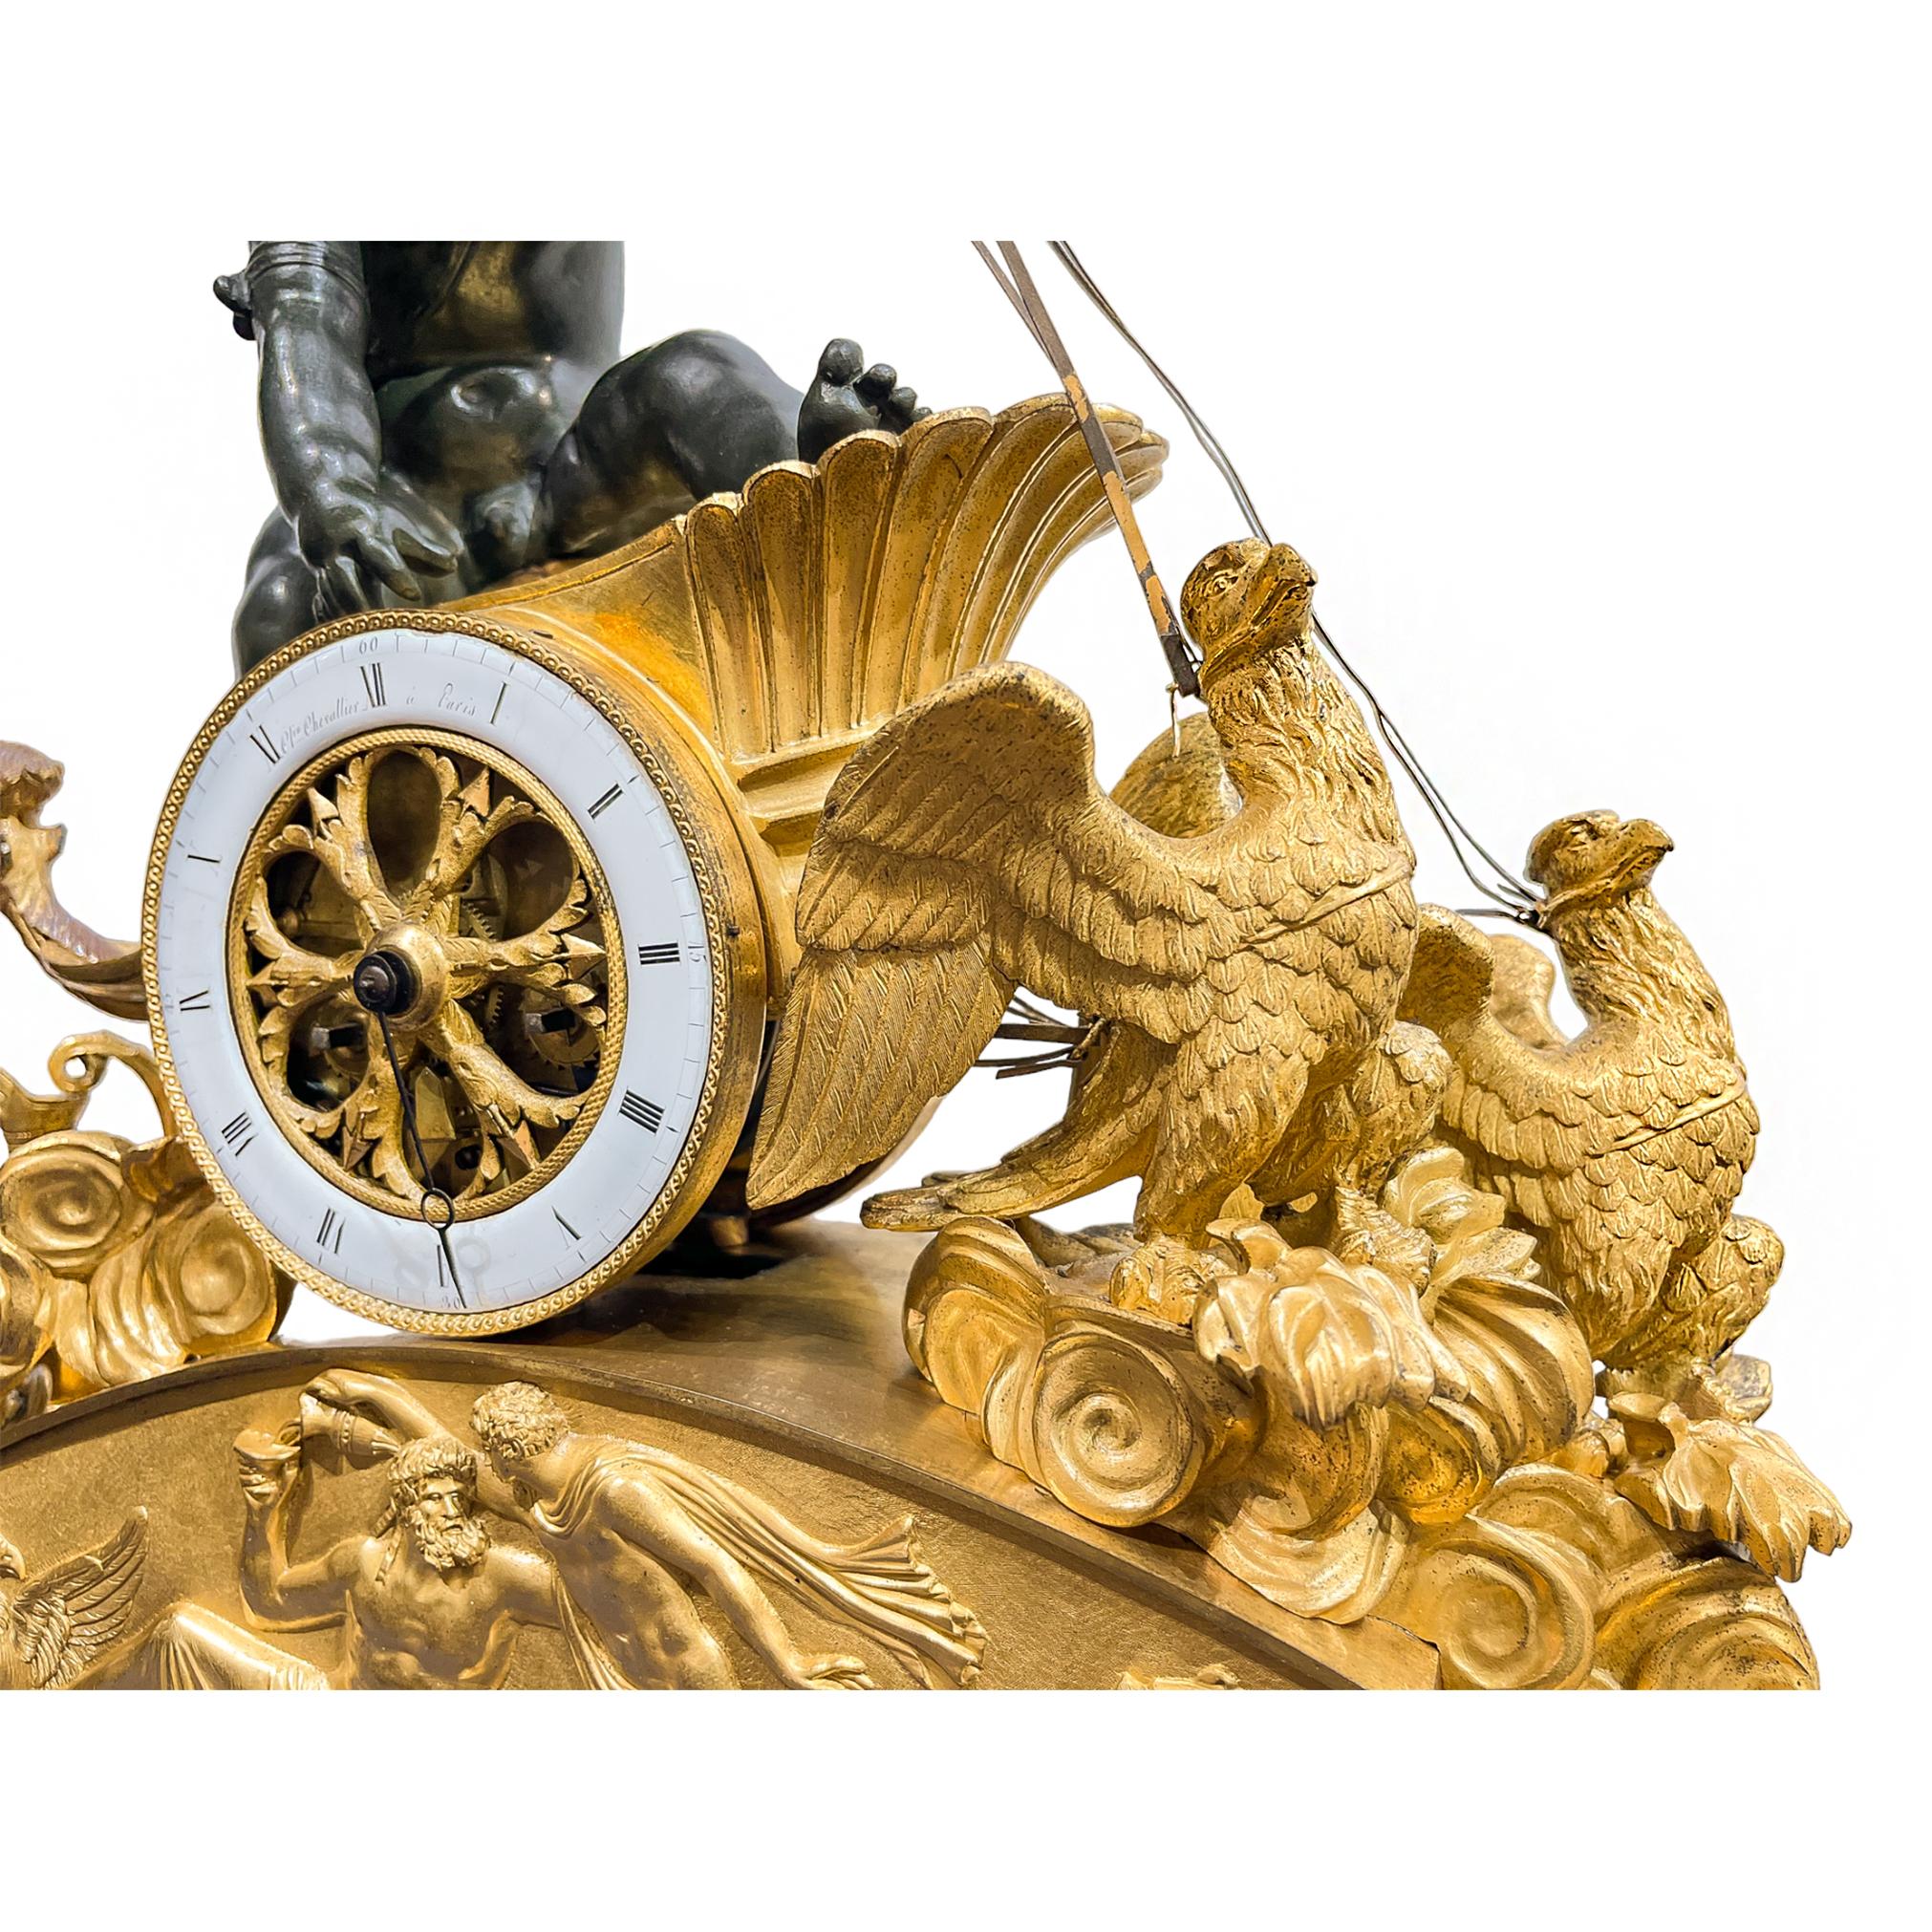 Gilt Empire Chariot Clock with Bronzed Putti, Eagles, and Neoclassical Bas Relief 